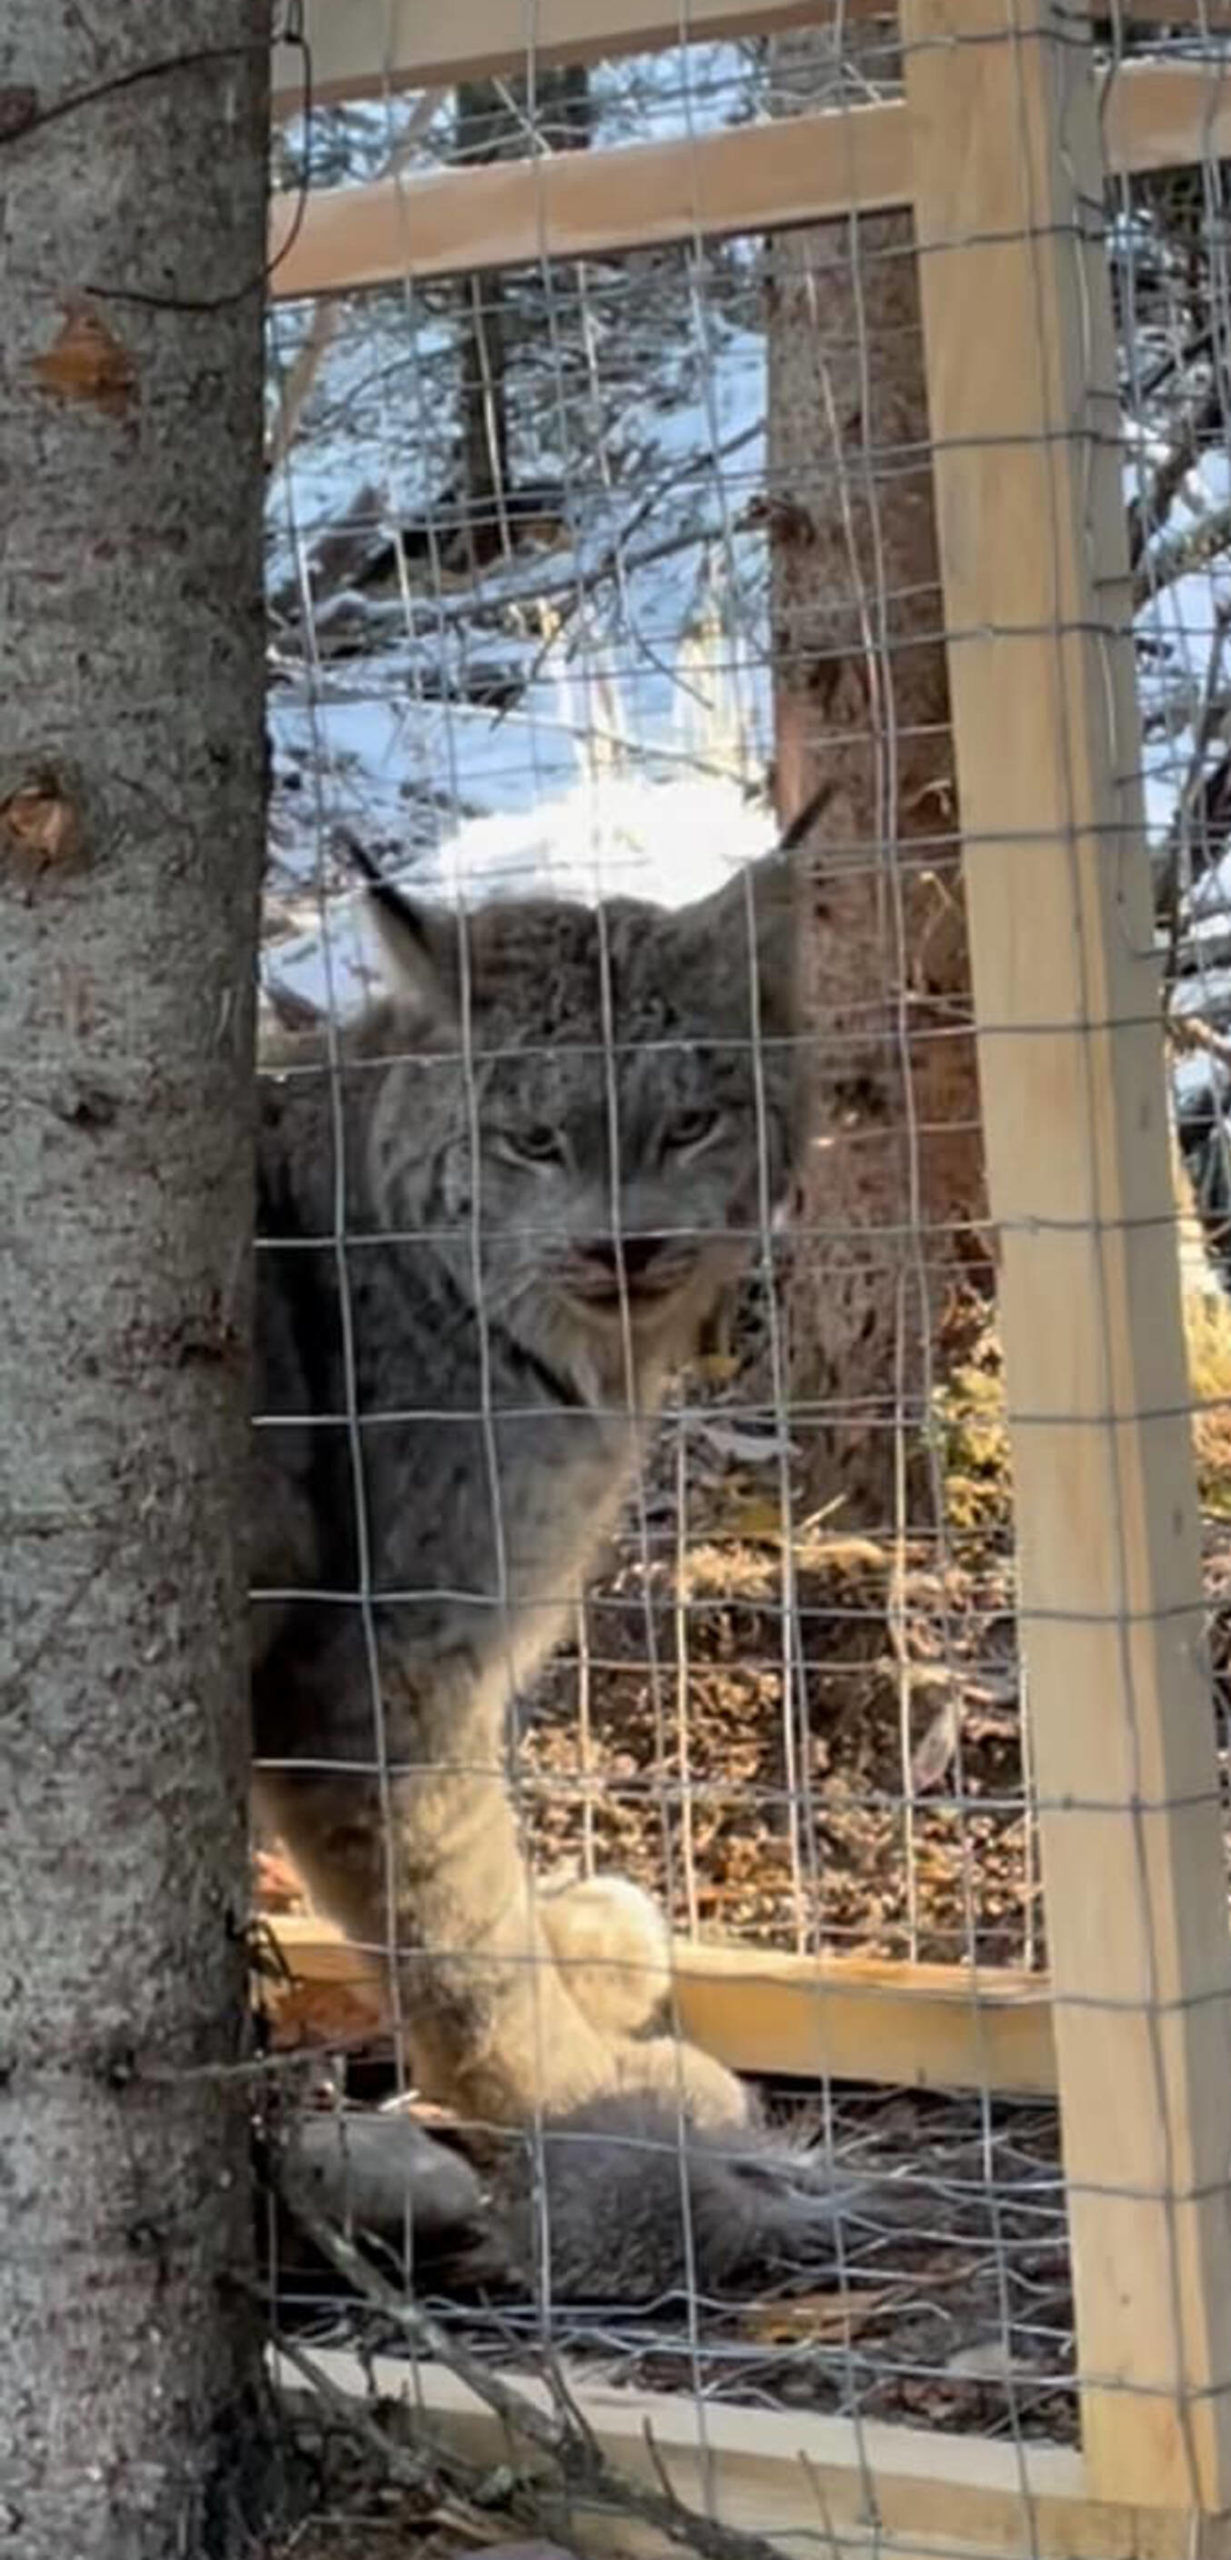 Submitted photo
A caged lynx caught in a live-trap.